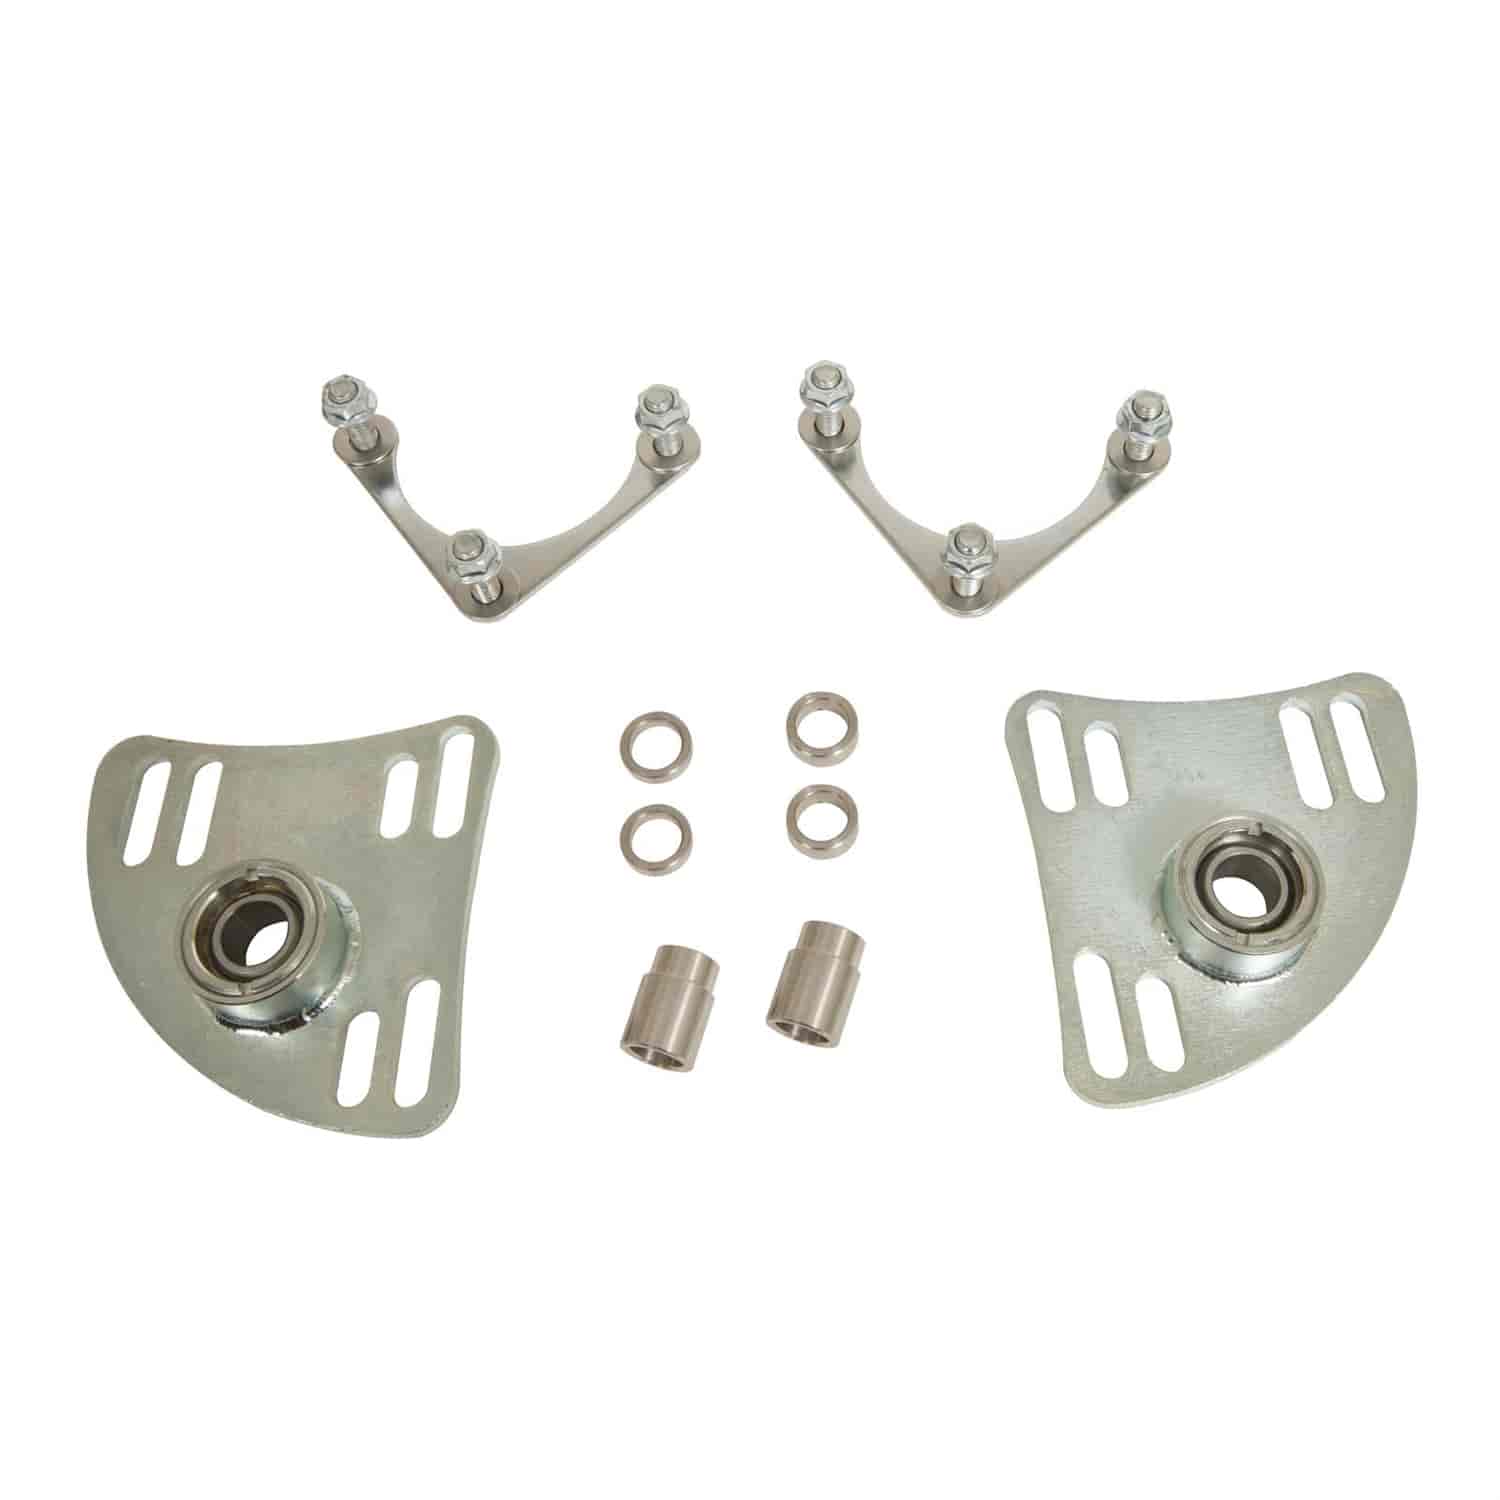 94-04 Mustang caster / camber plates